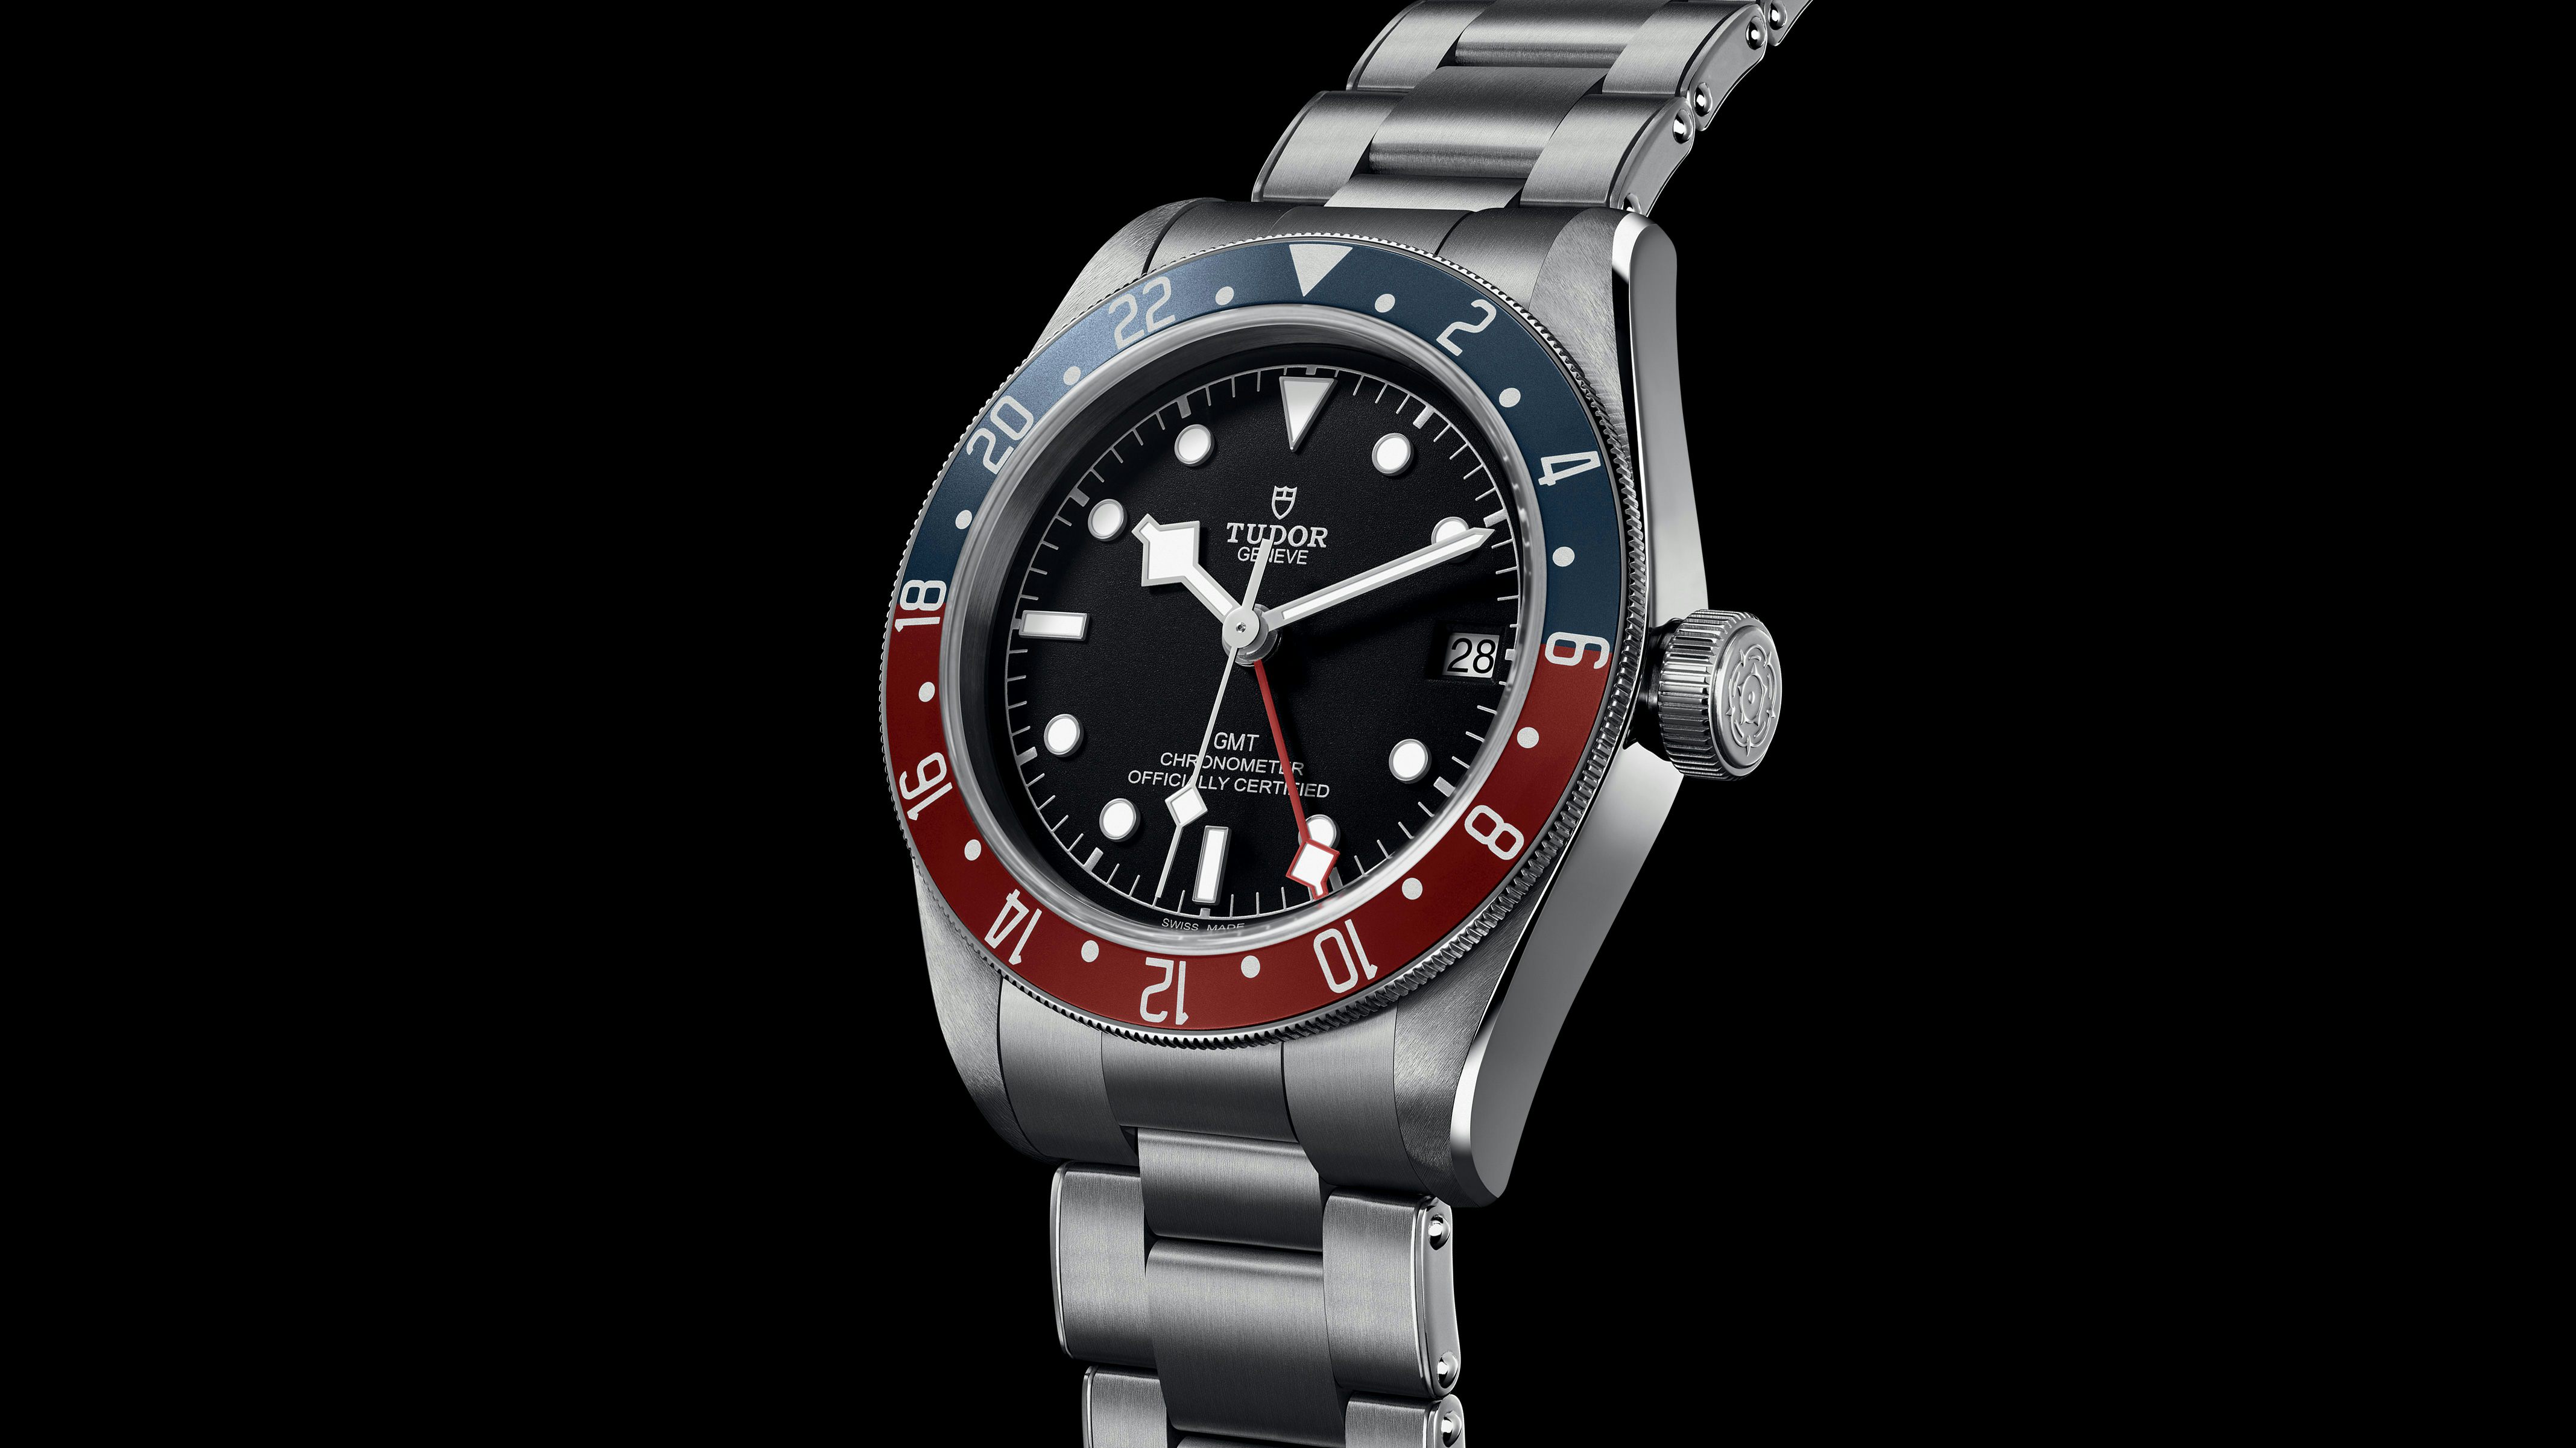 Introducing: The Tudor North Flag, With Tudor's First In-House Movement  (Live Photos, Specs, Pricing) - Hodinkee